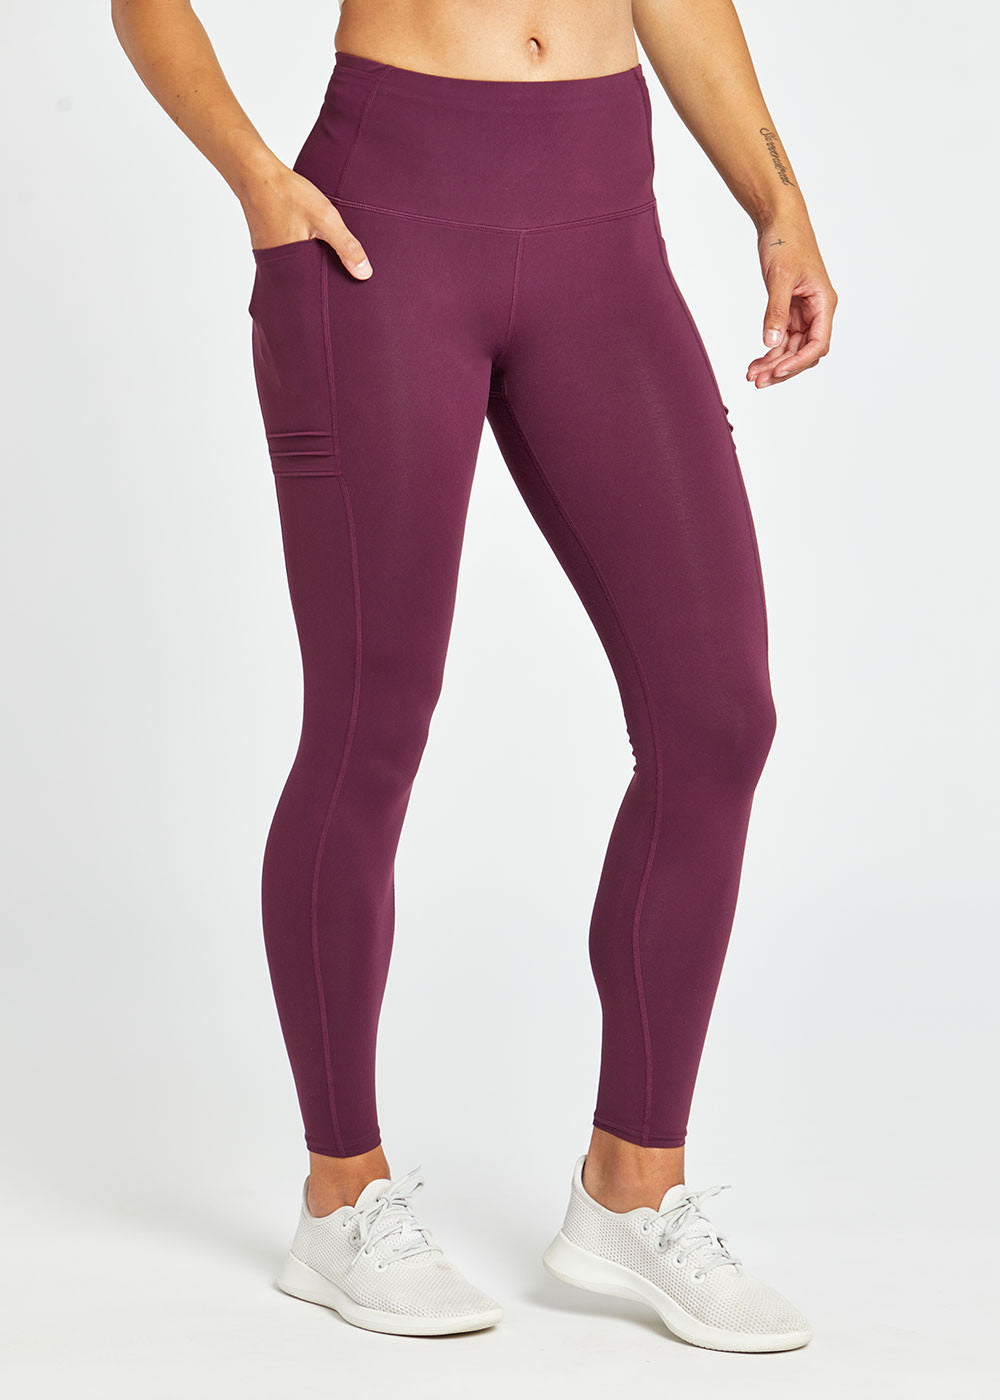 Solid Wide Band High Waist Sports Leggings